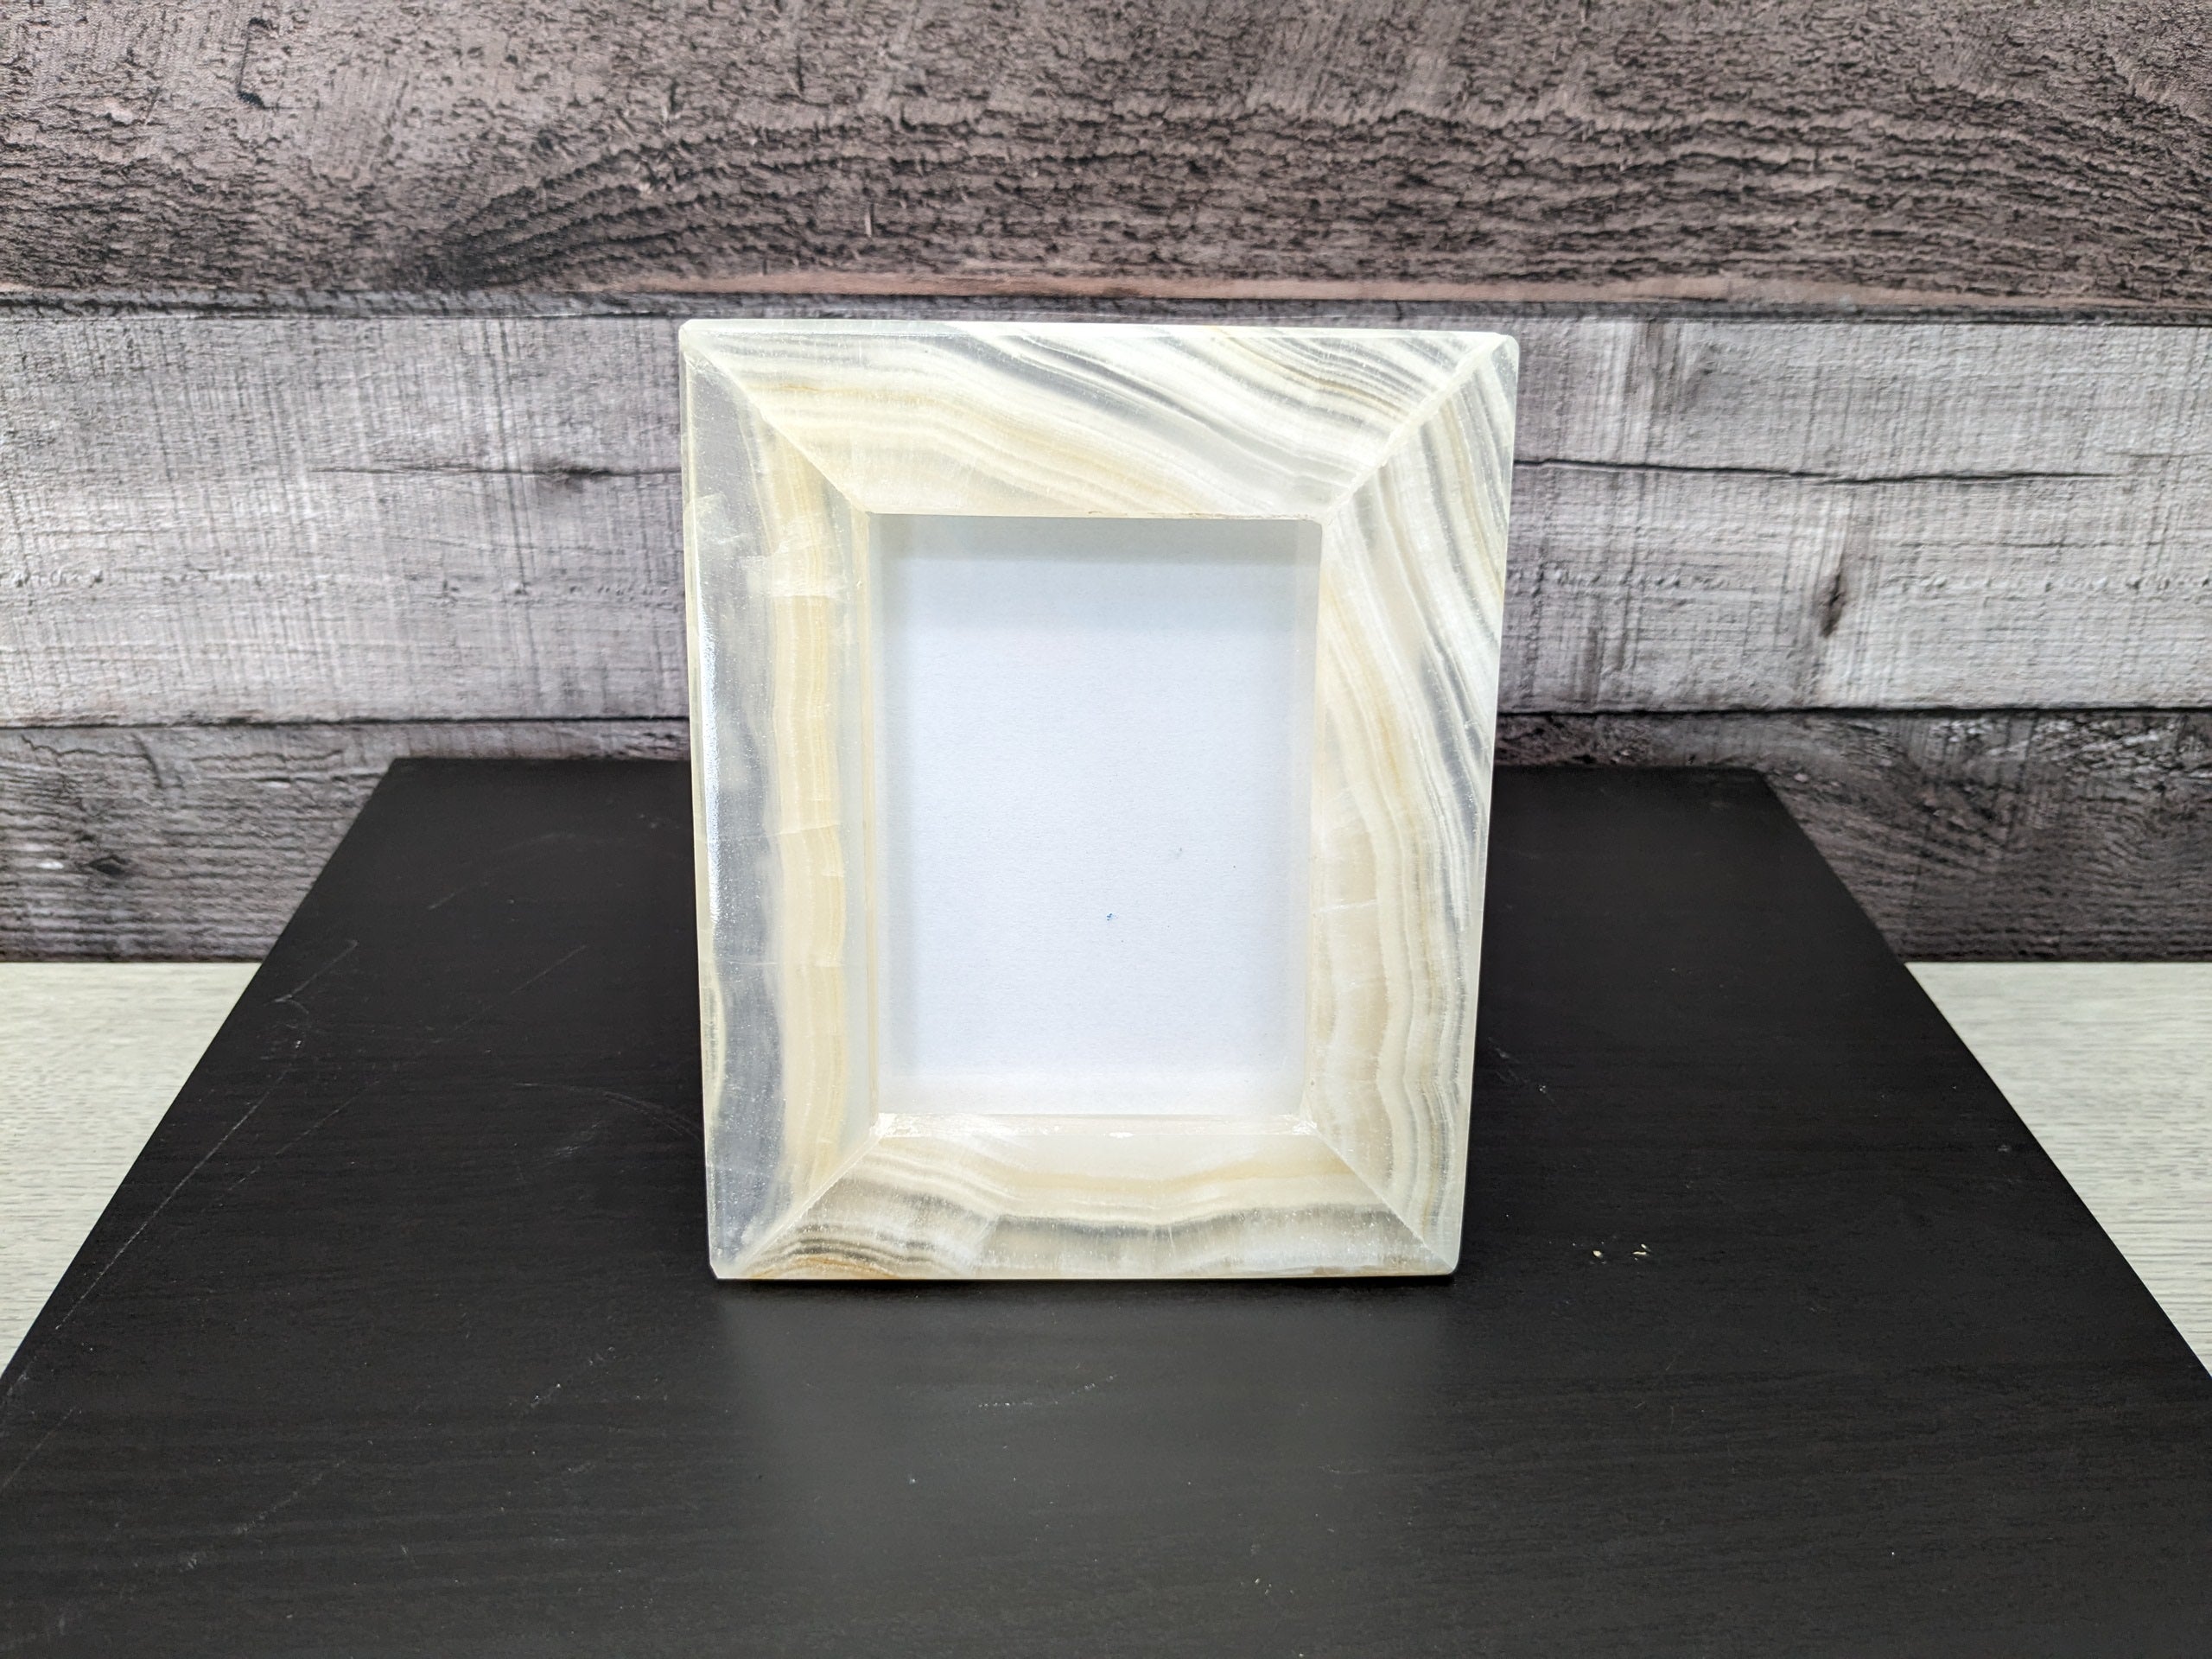 White Onyx Frame with Glass Covering and  Travertine Stone Stand. Handmade in Mexico. We package and ship from the USA. Buy now at www.felipeandgrace.com.